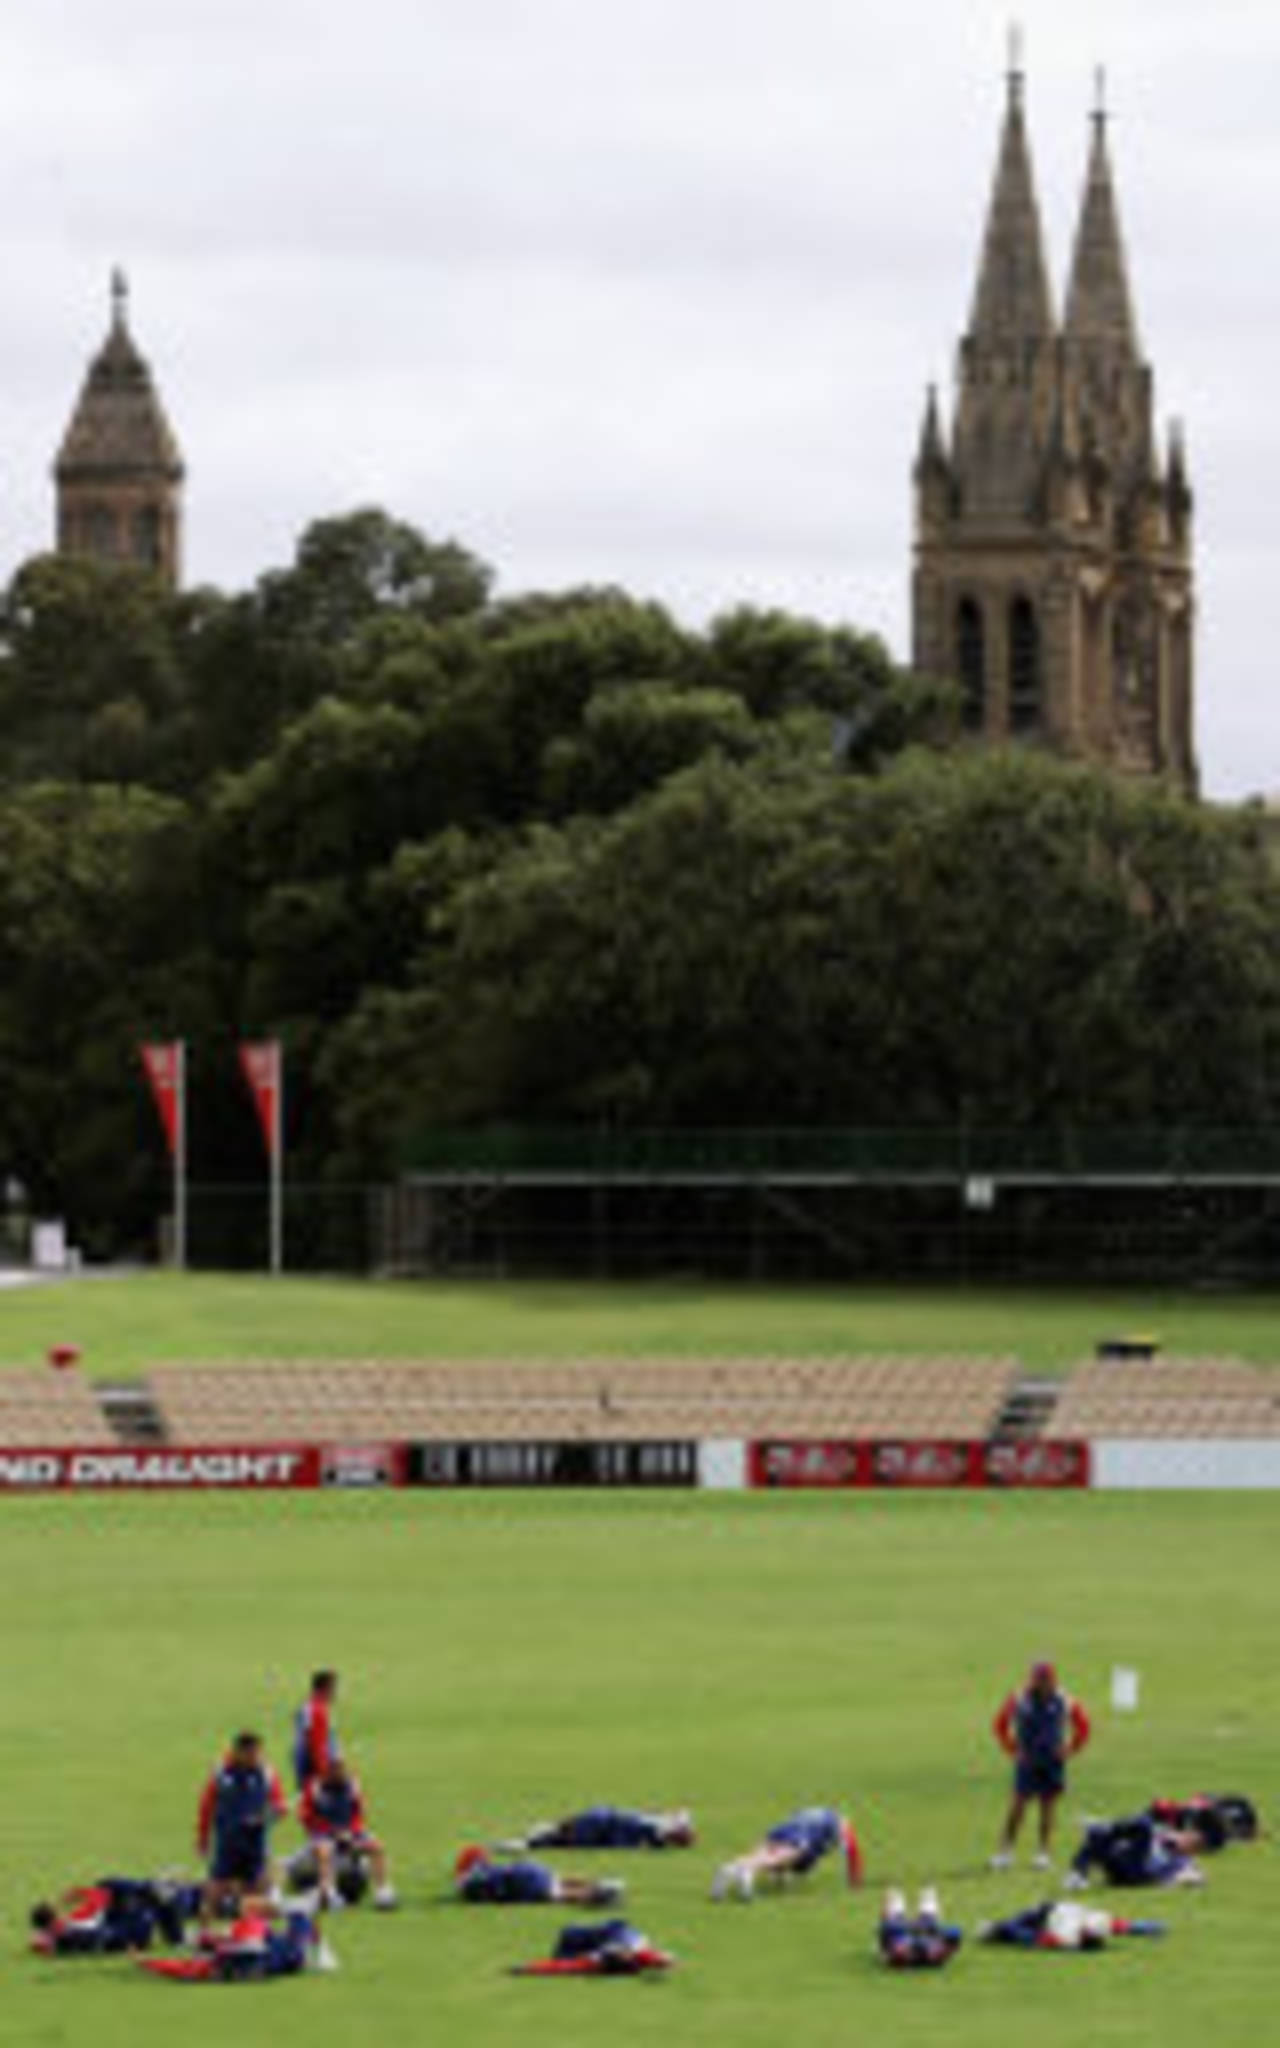 England train against the backdrop of Adelaide cathedral, Adelaide, November 16, 2006